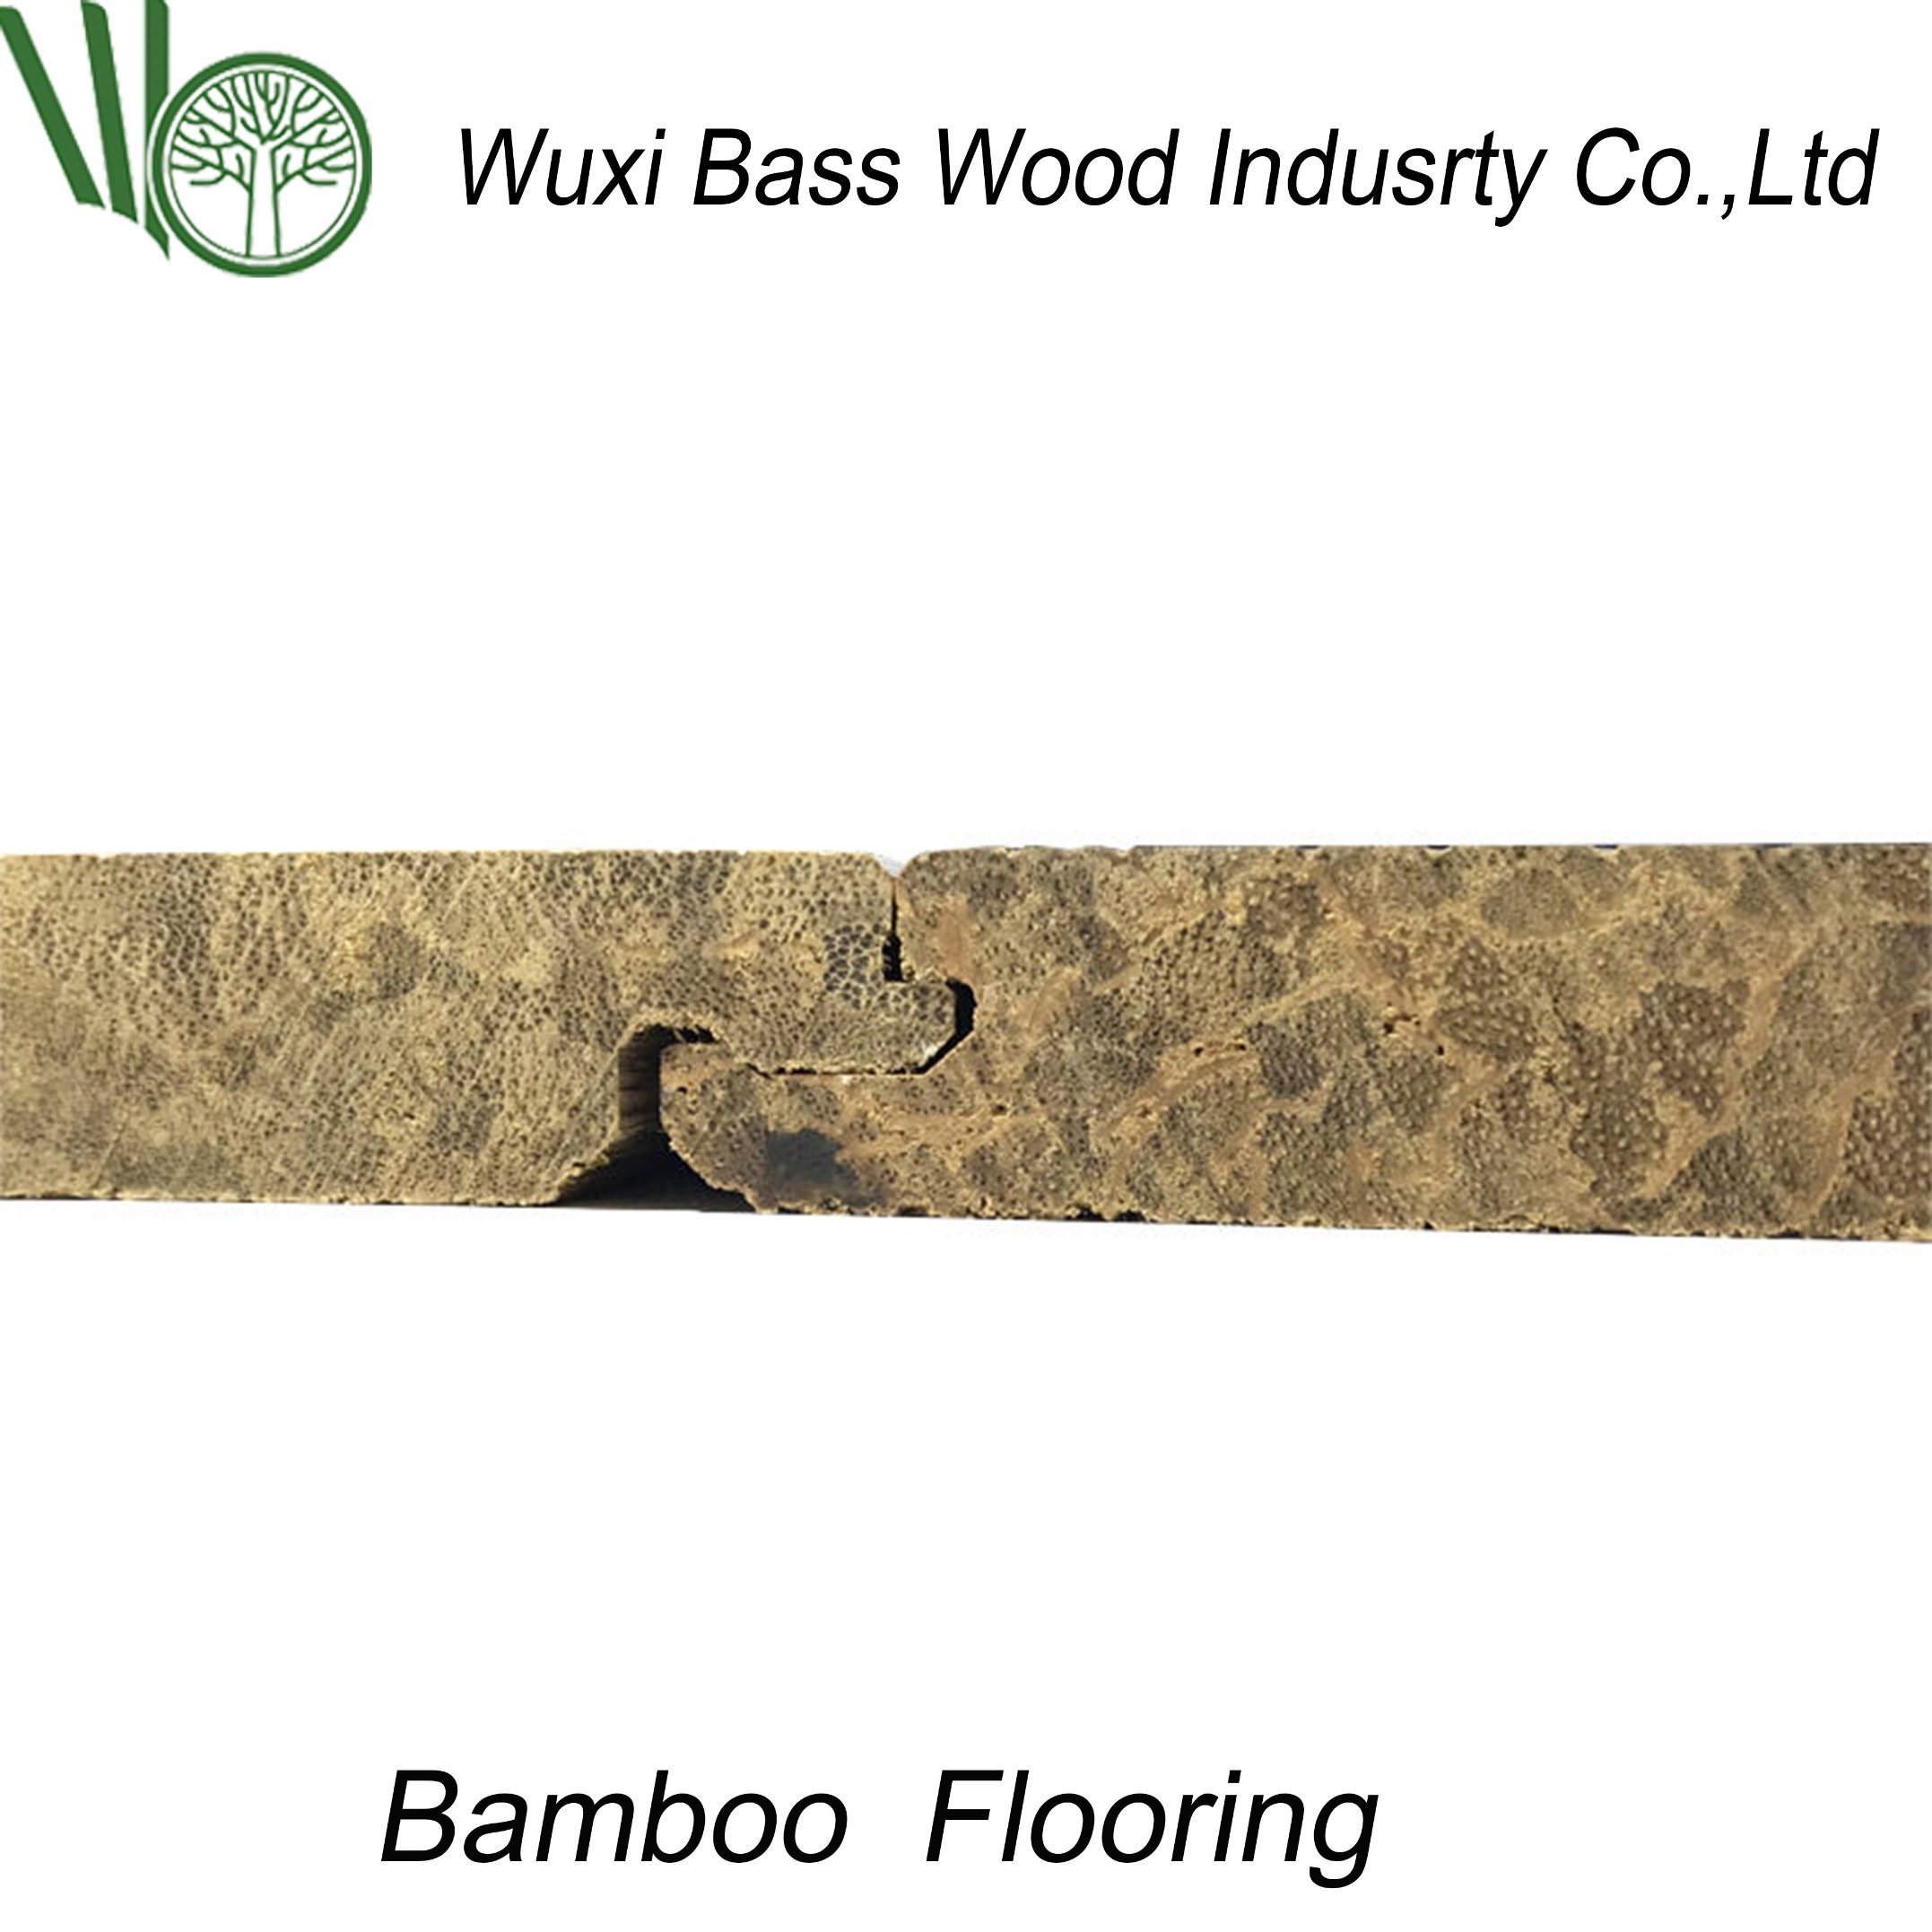 Bamboo Flooring with Strict Inspection